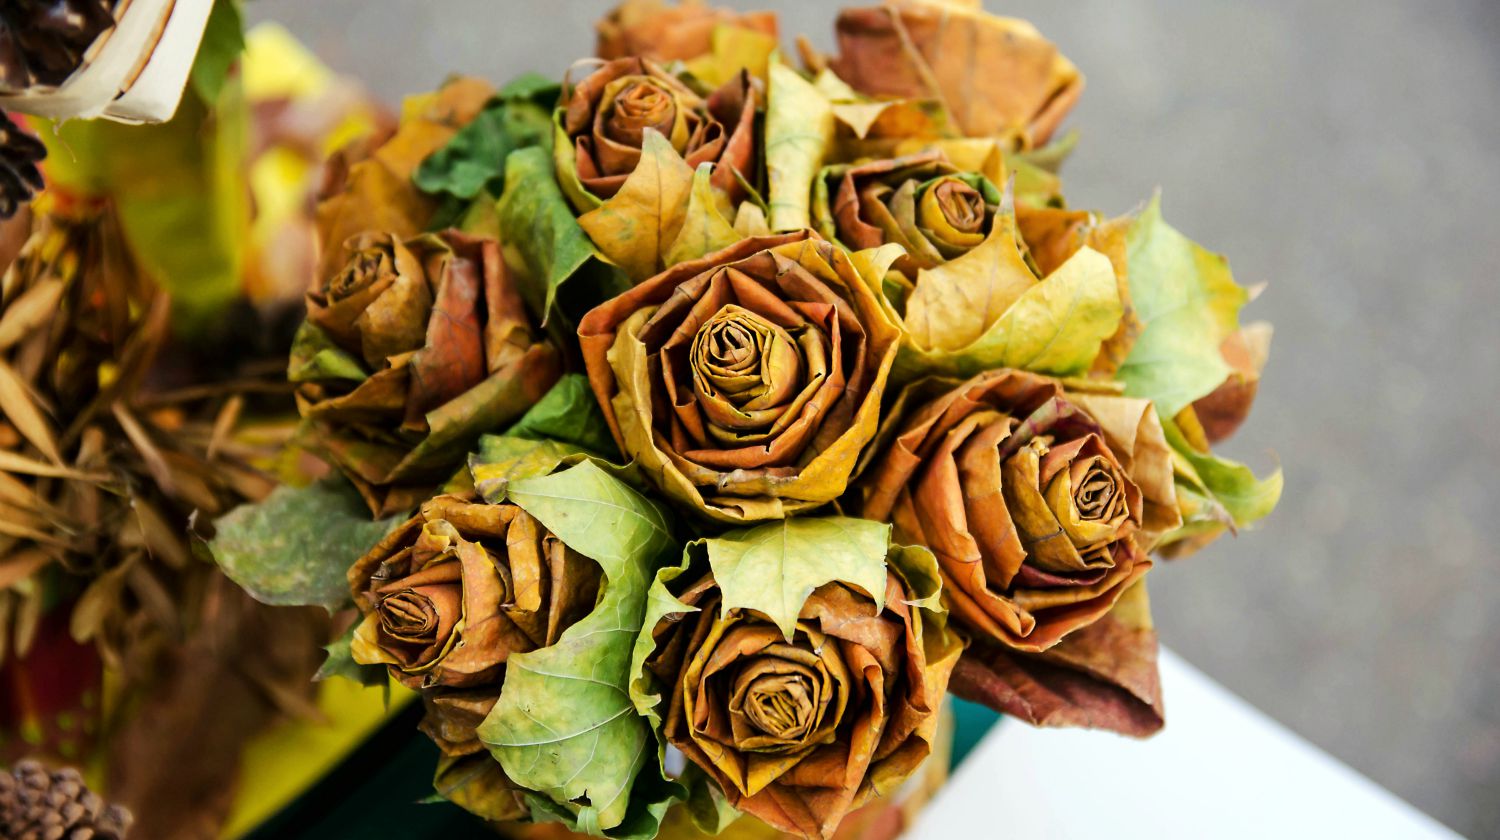 Bouquet of the roses made of dried autumn leaves | DIY Decorating Ideas With Actual Fall Leaves | Featured